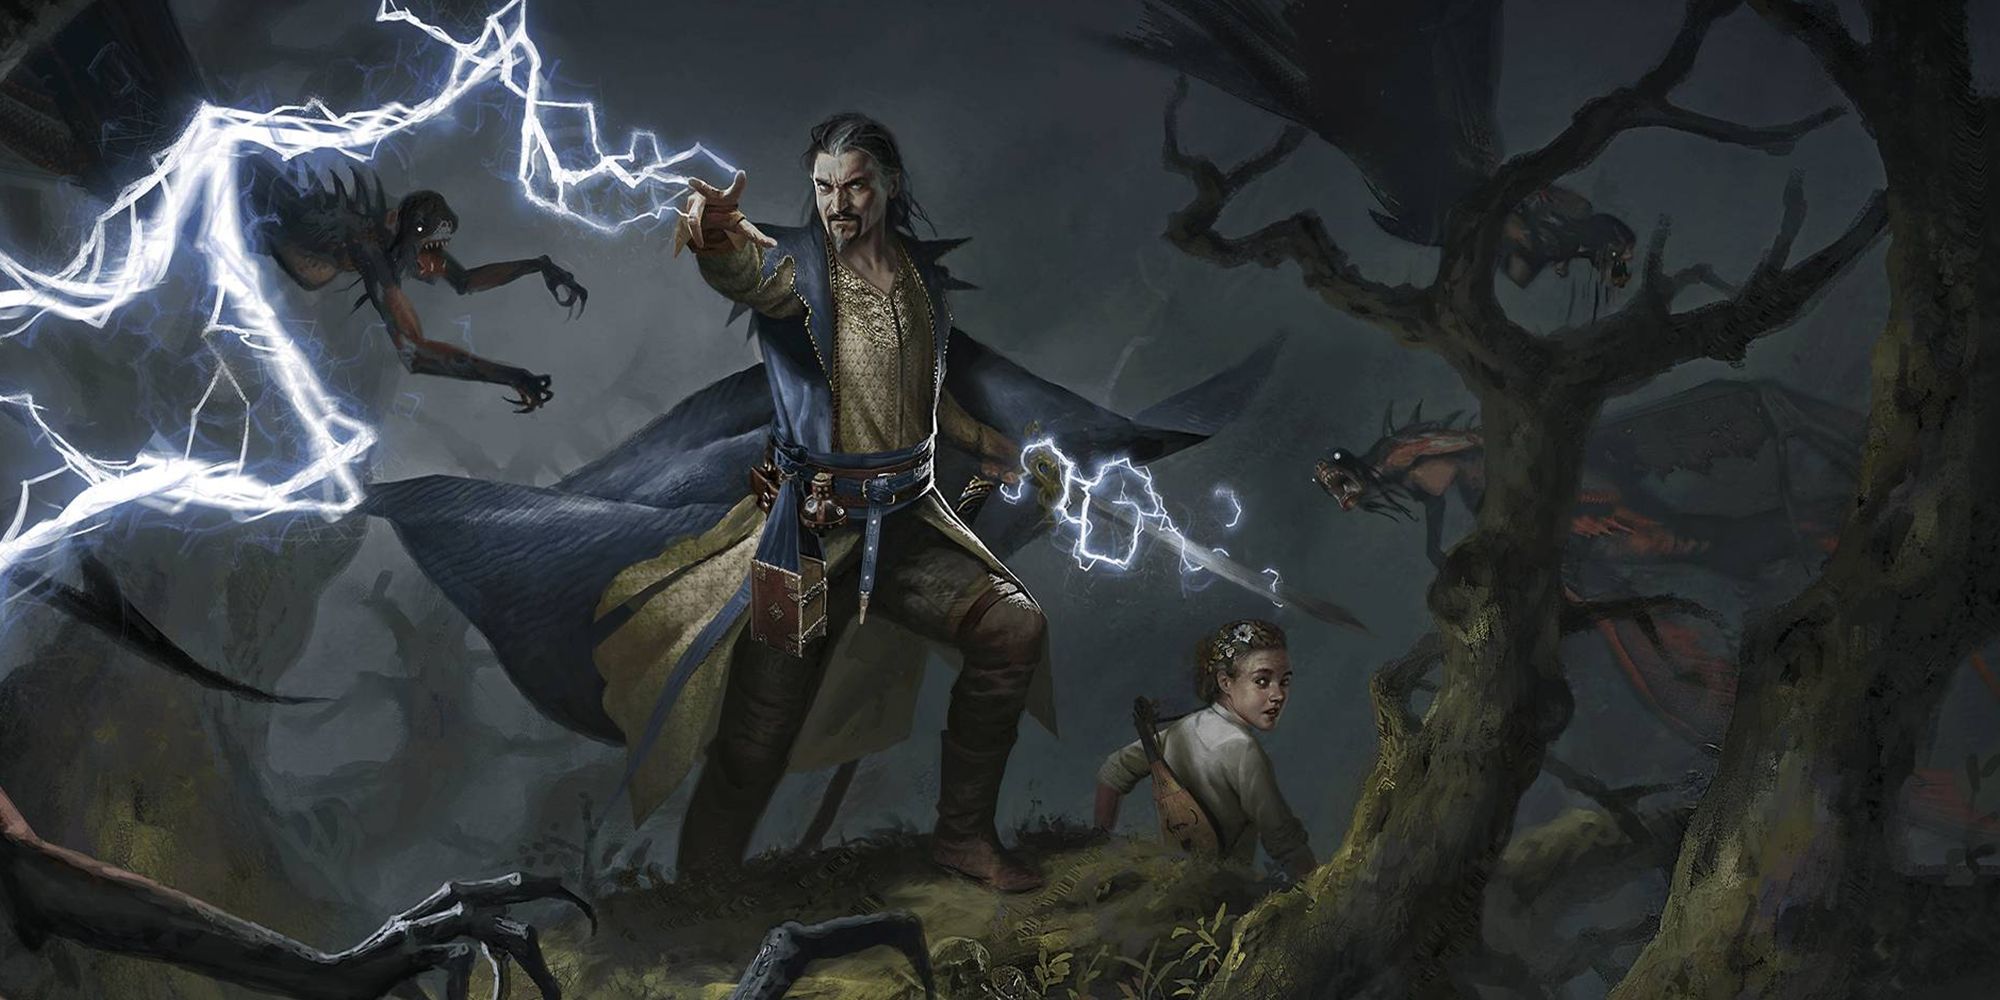 The Witcher - Promo Art Of Alzur For Gwent Game Showing Him Using His Thunder Spell